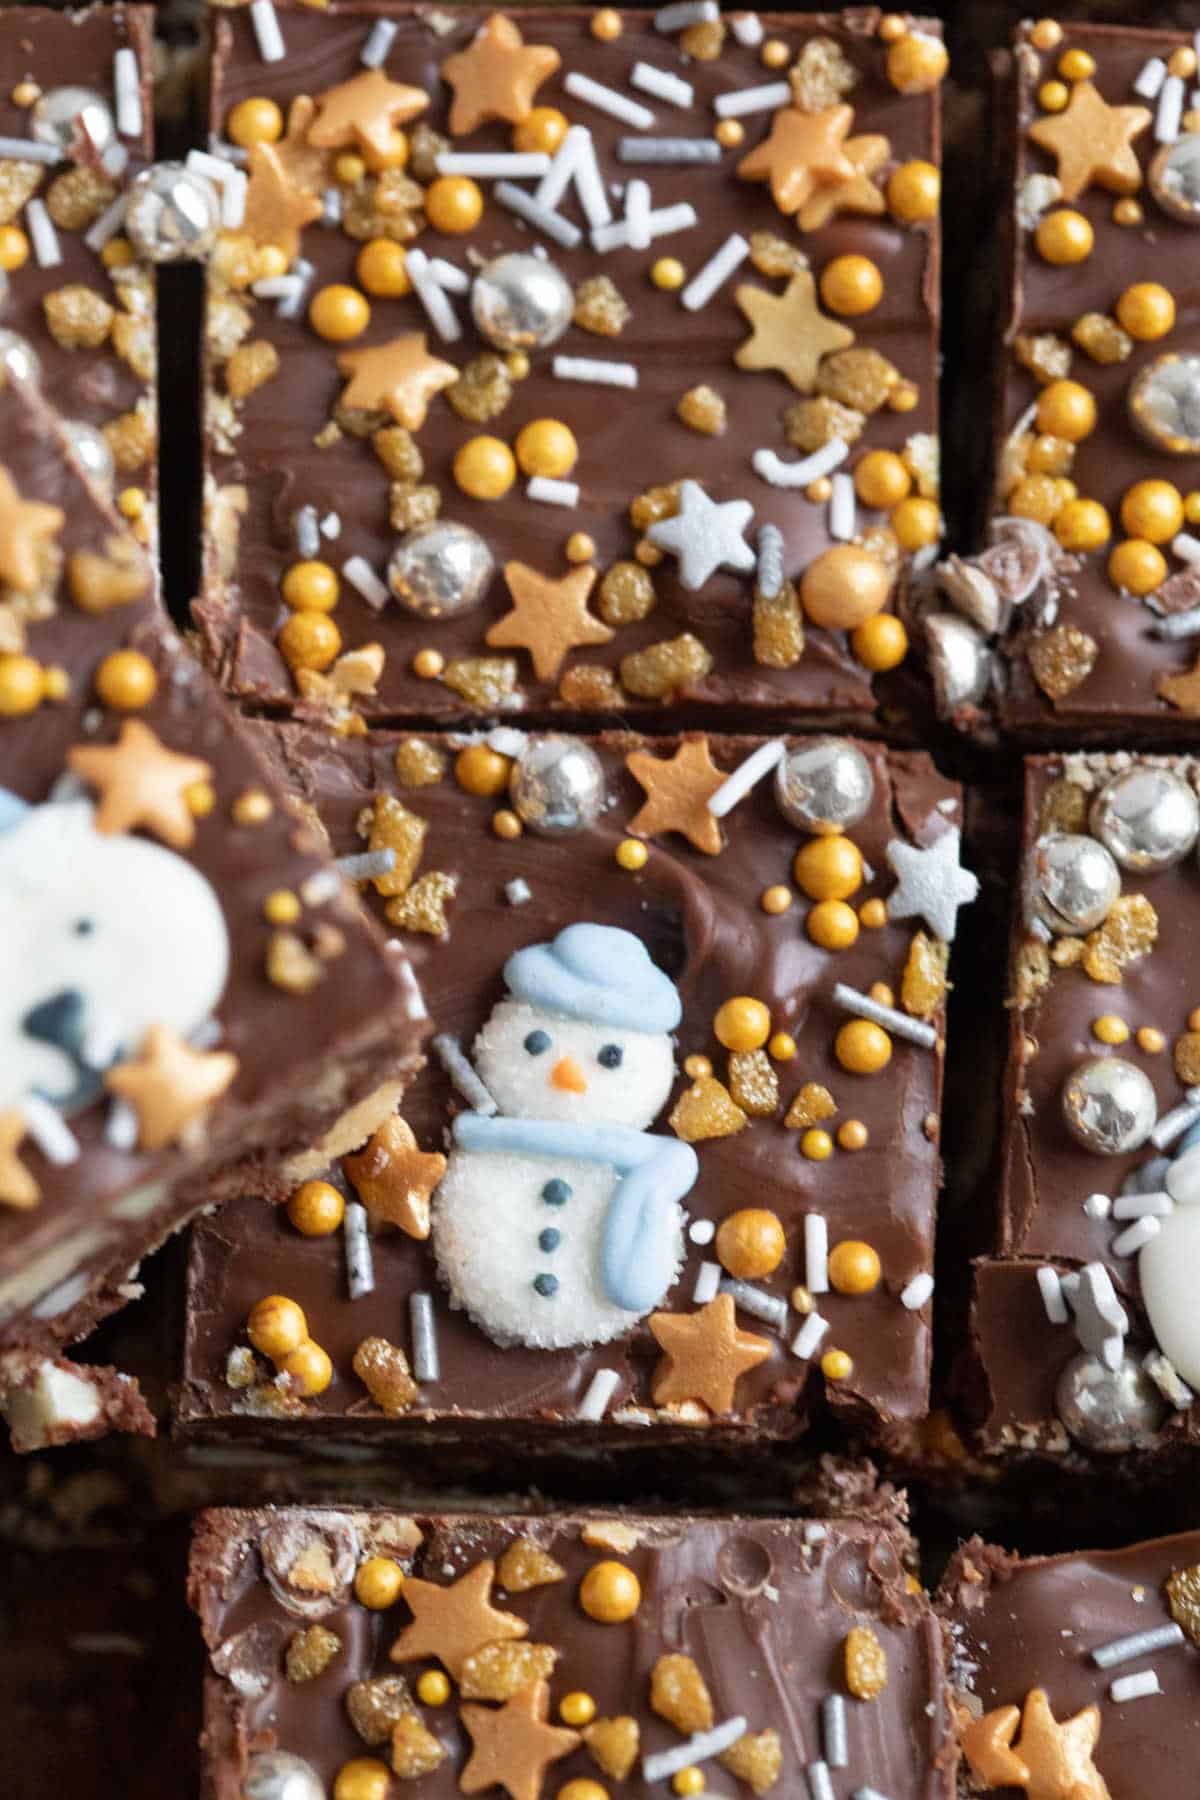 Chocolate tiffin with Christmas sprinkles.